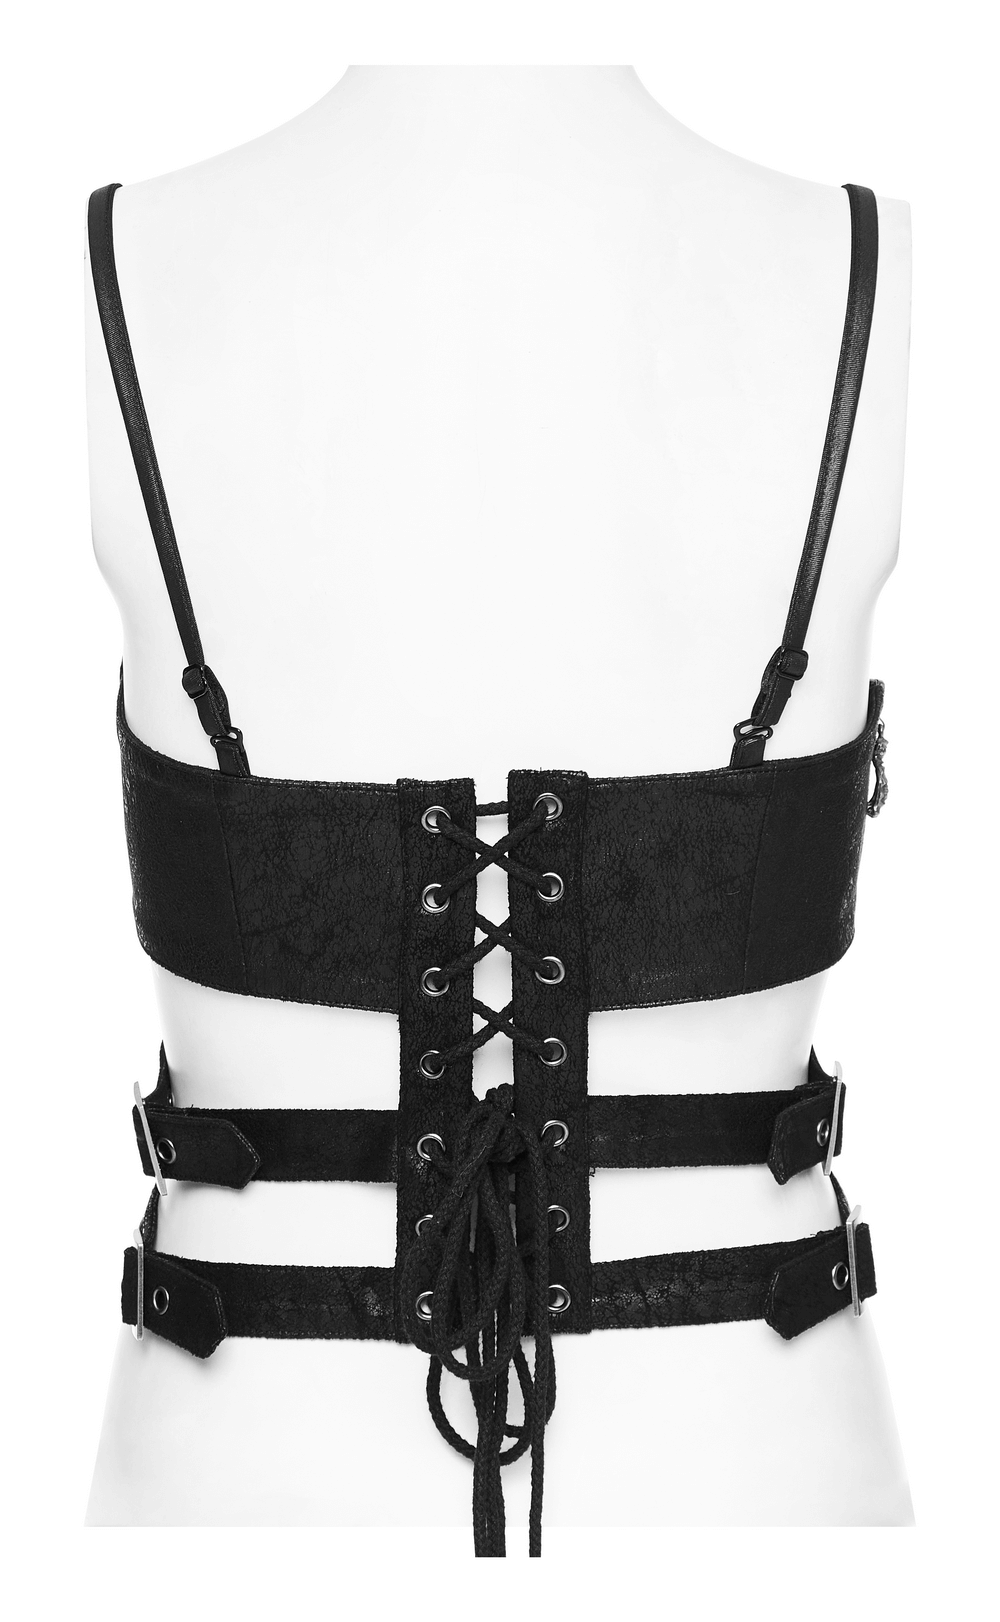 Faux Leather Lace Up Top With Eyelet and Zipper Details